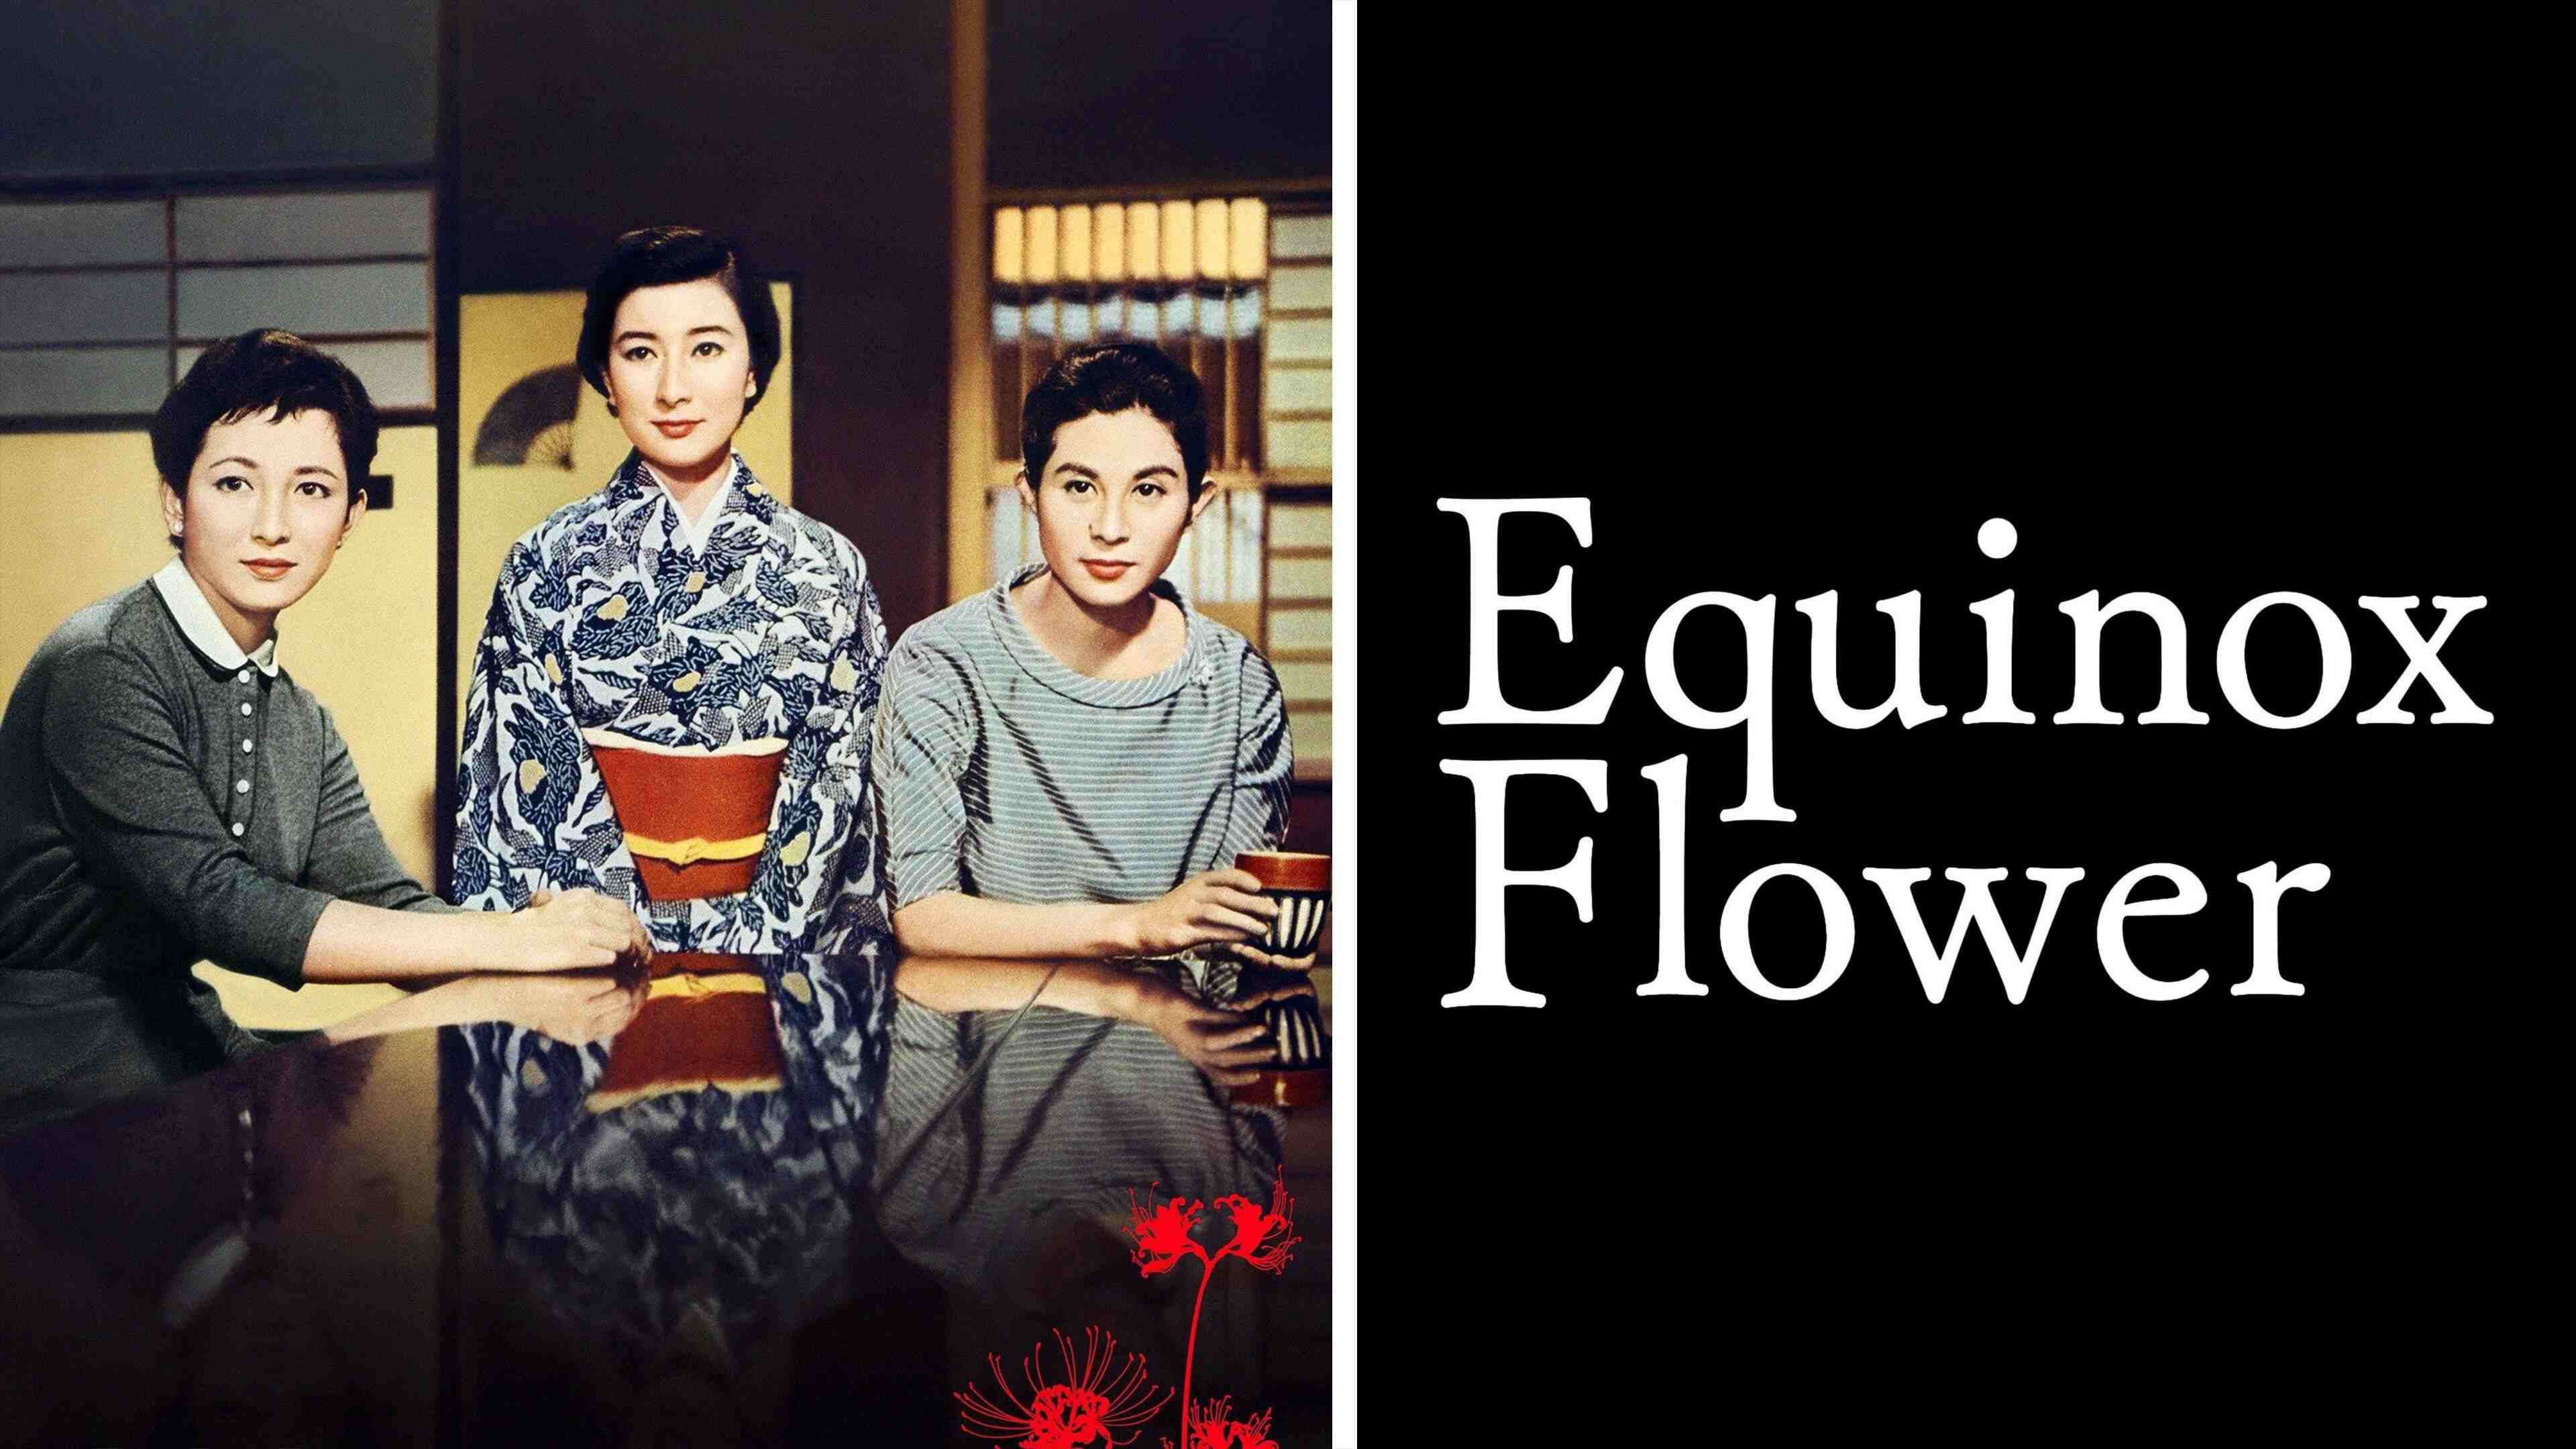 31-facts-about-the-movie-equinox-flower